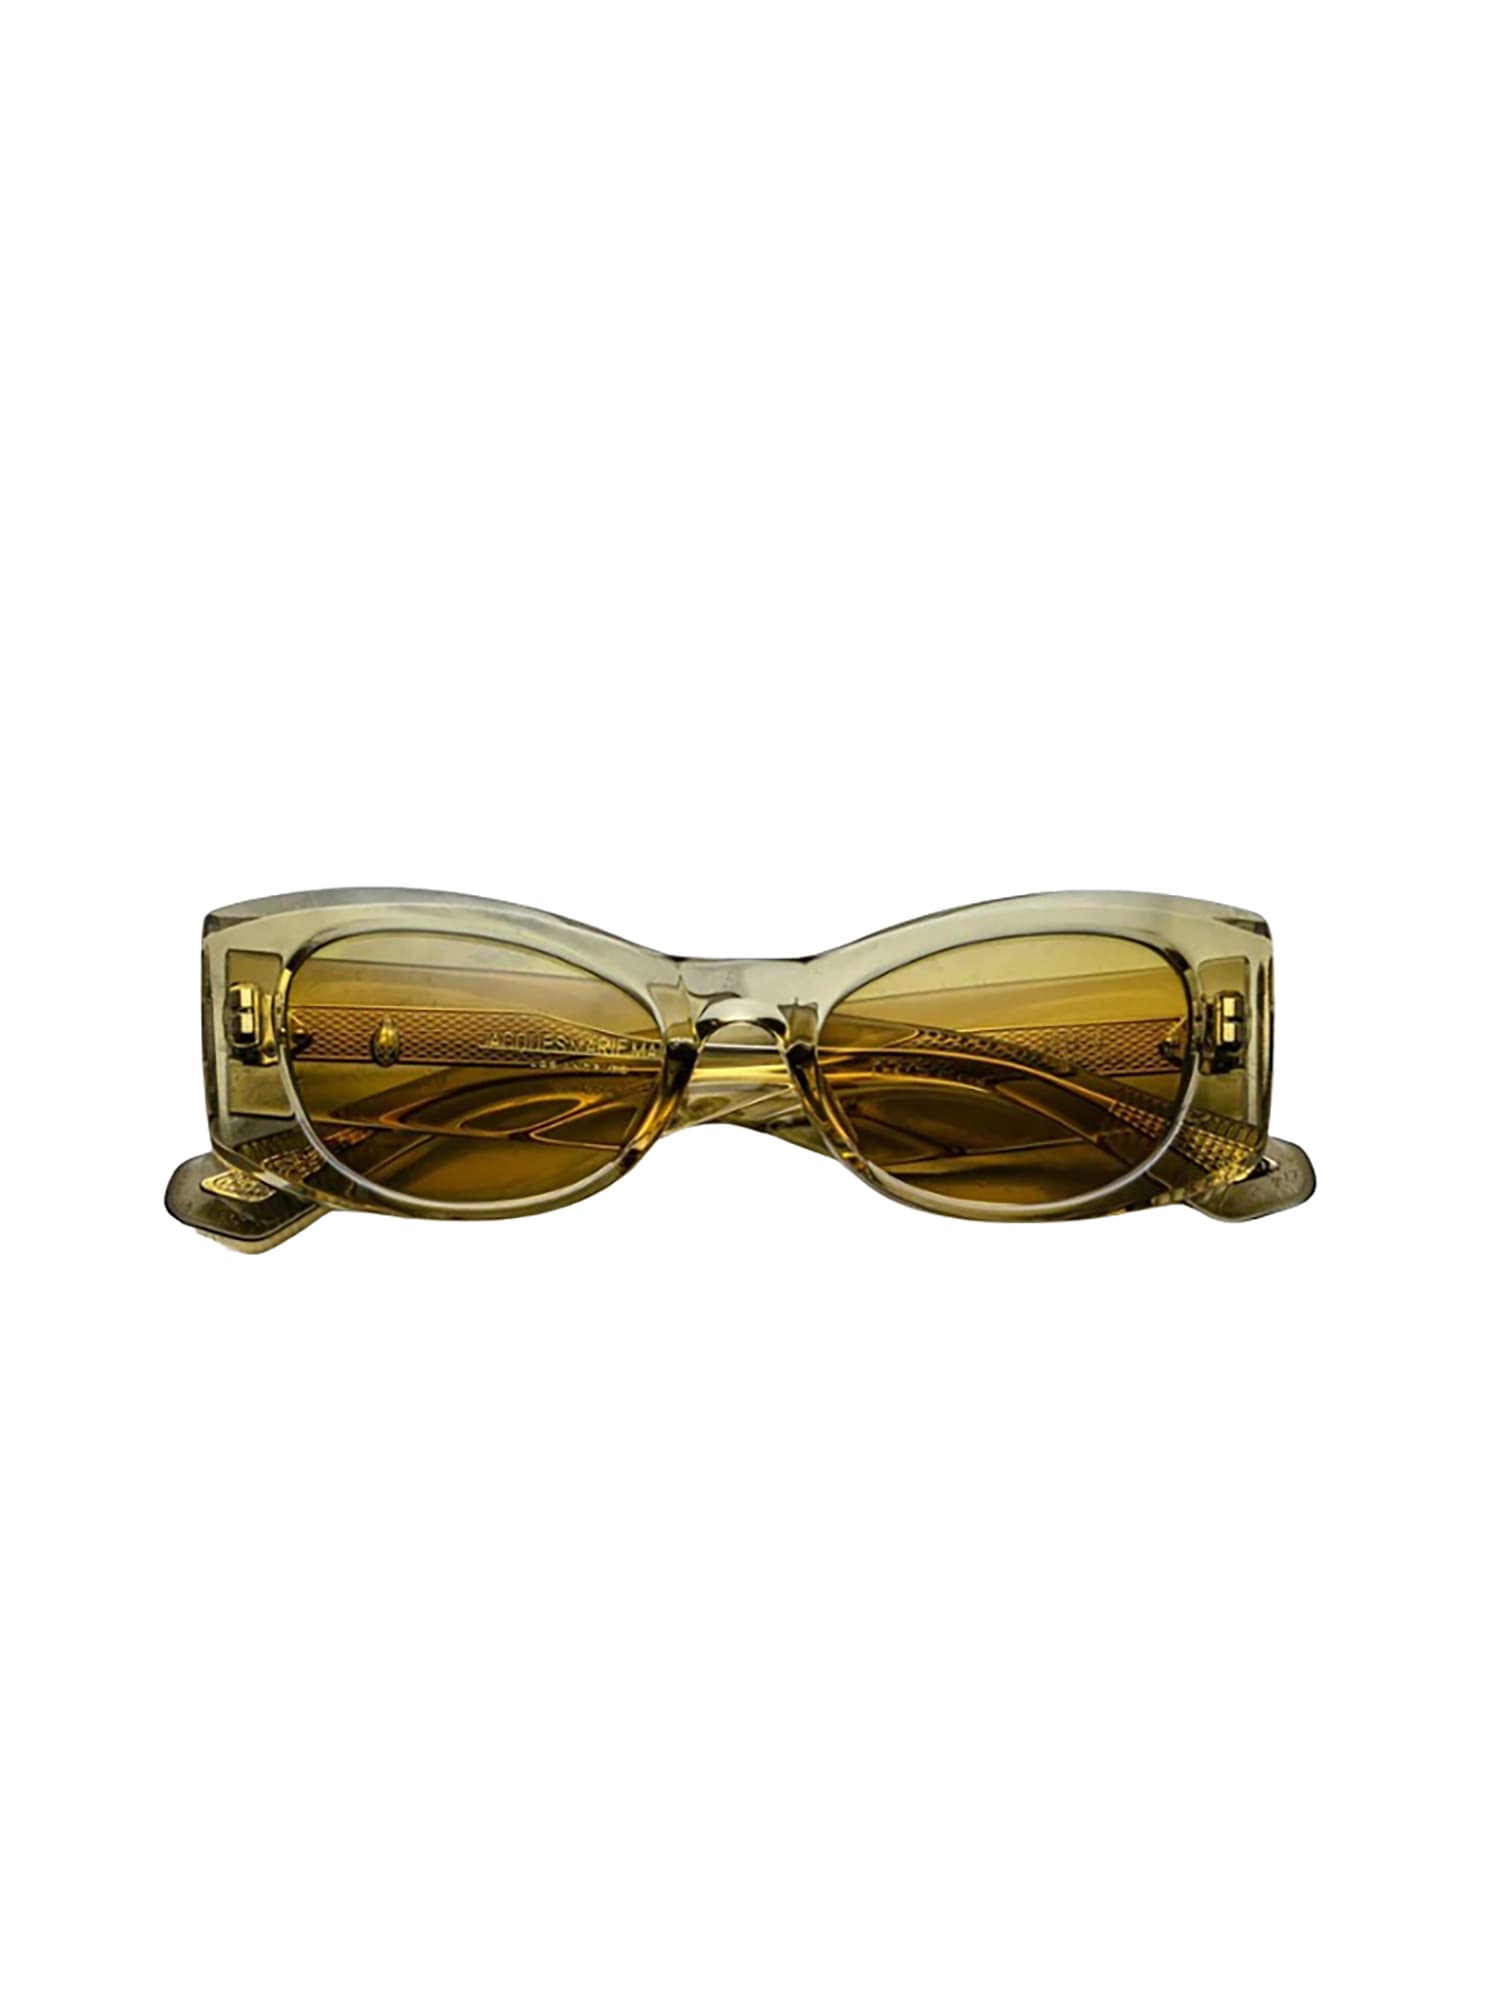 Jacques Marie Mage Harlo Sunglasses In Q Olive